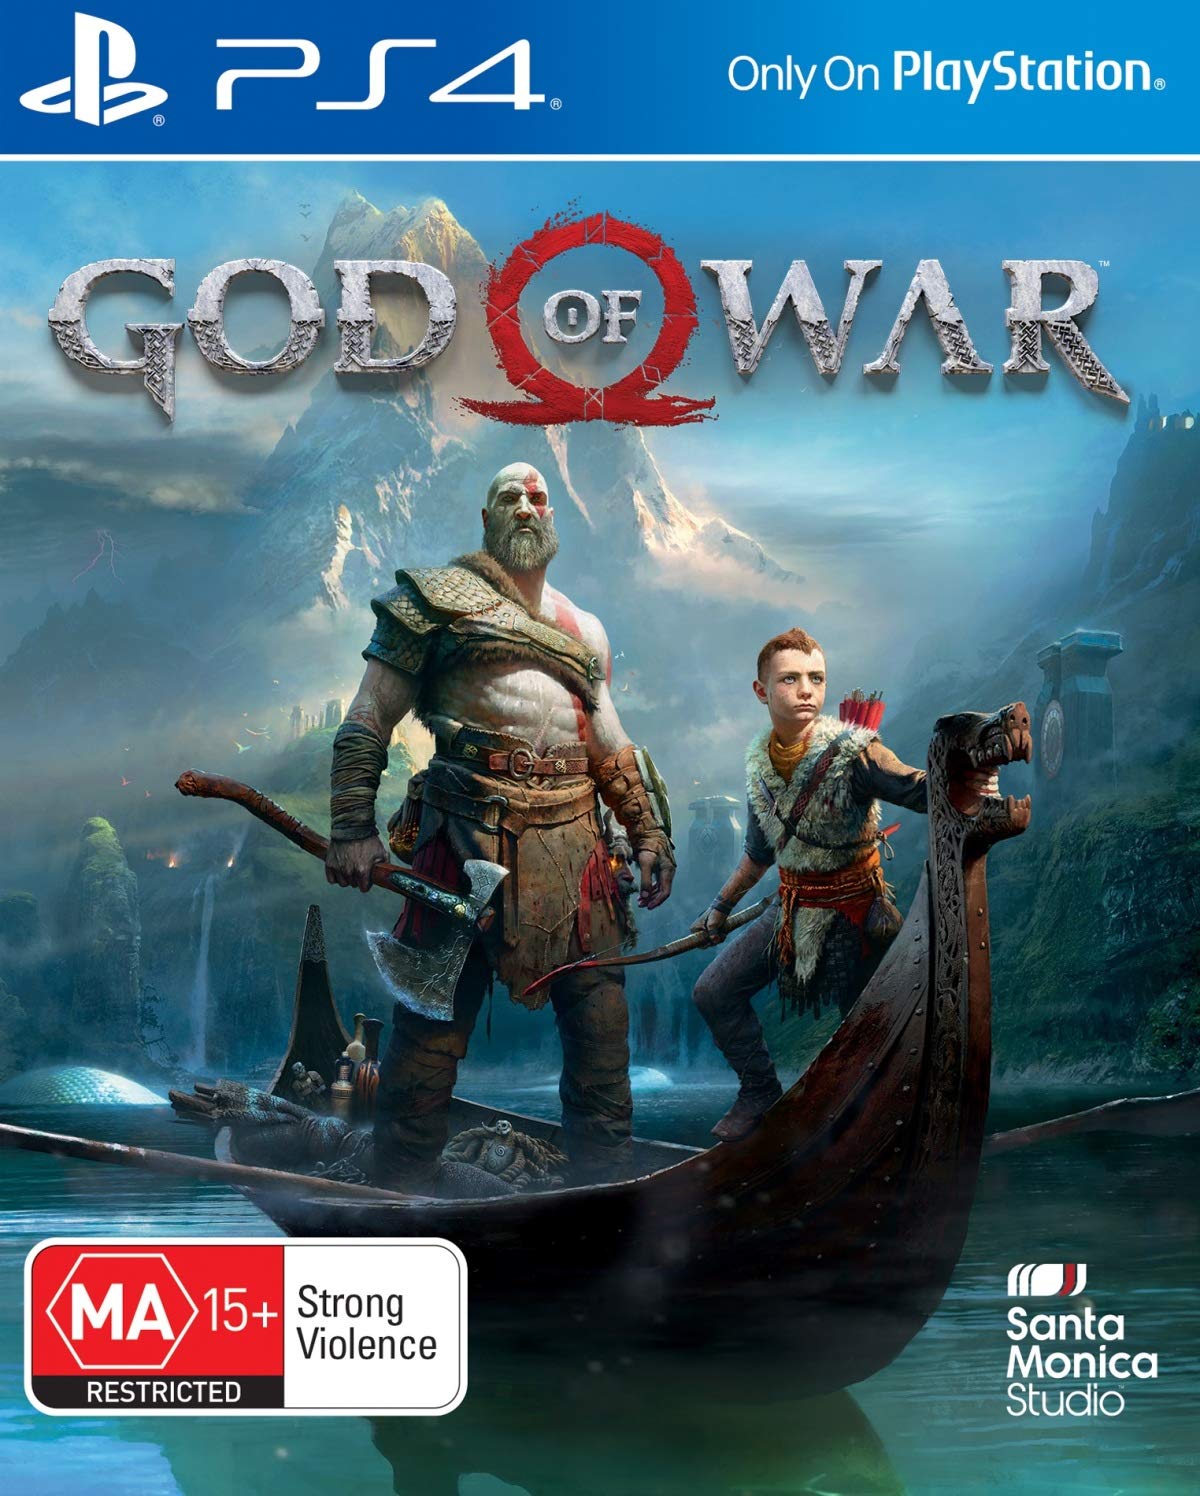 God of War (PS4 / Playstation 4) Journey to a dark, elemental world of fearsome creatures - image 1 of 5